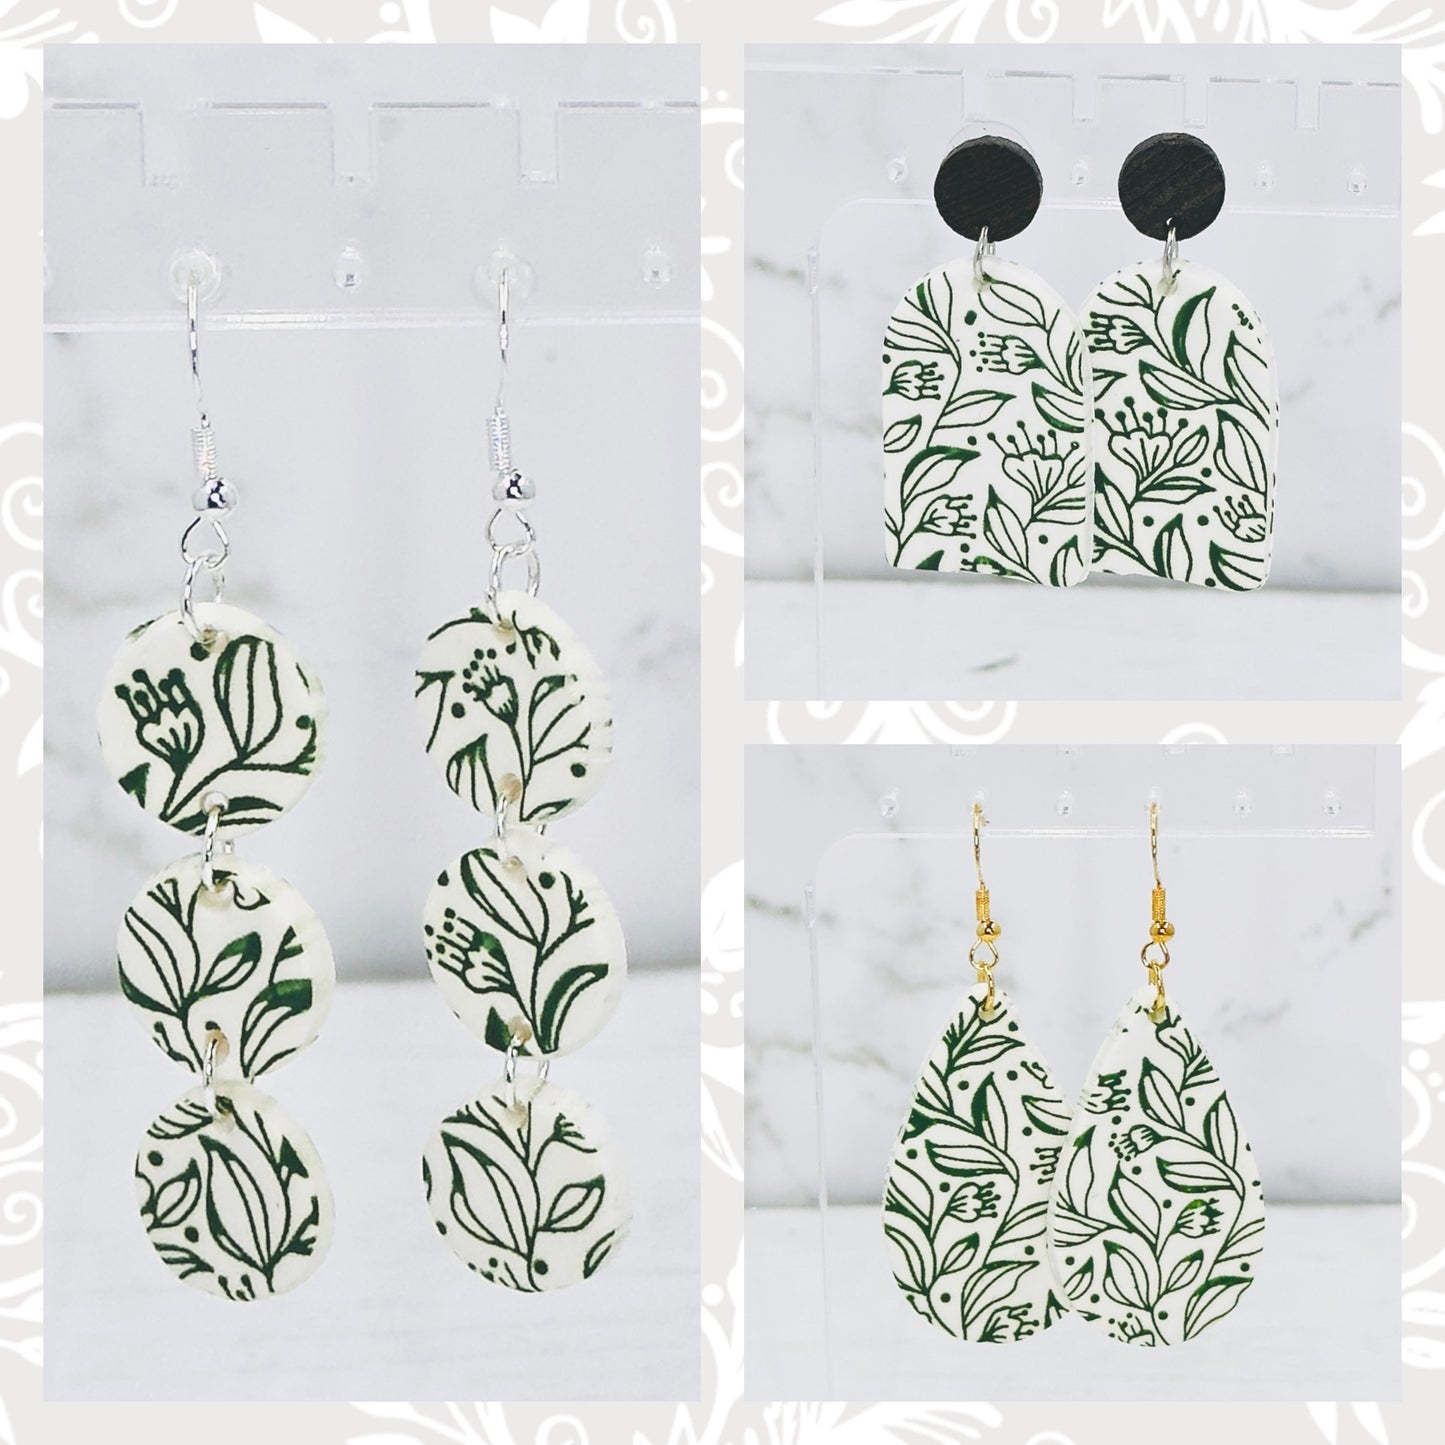 Vine Stenciled White Polymer Clay Earrings